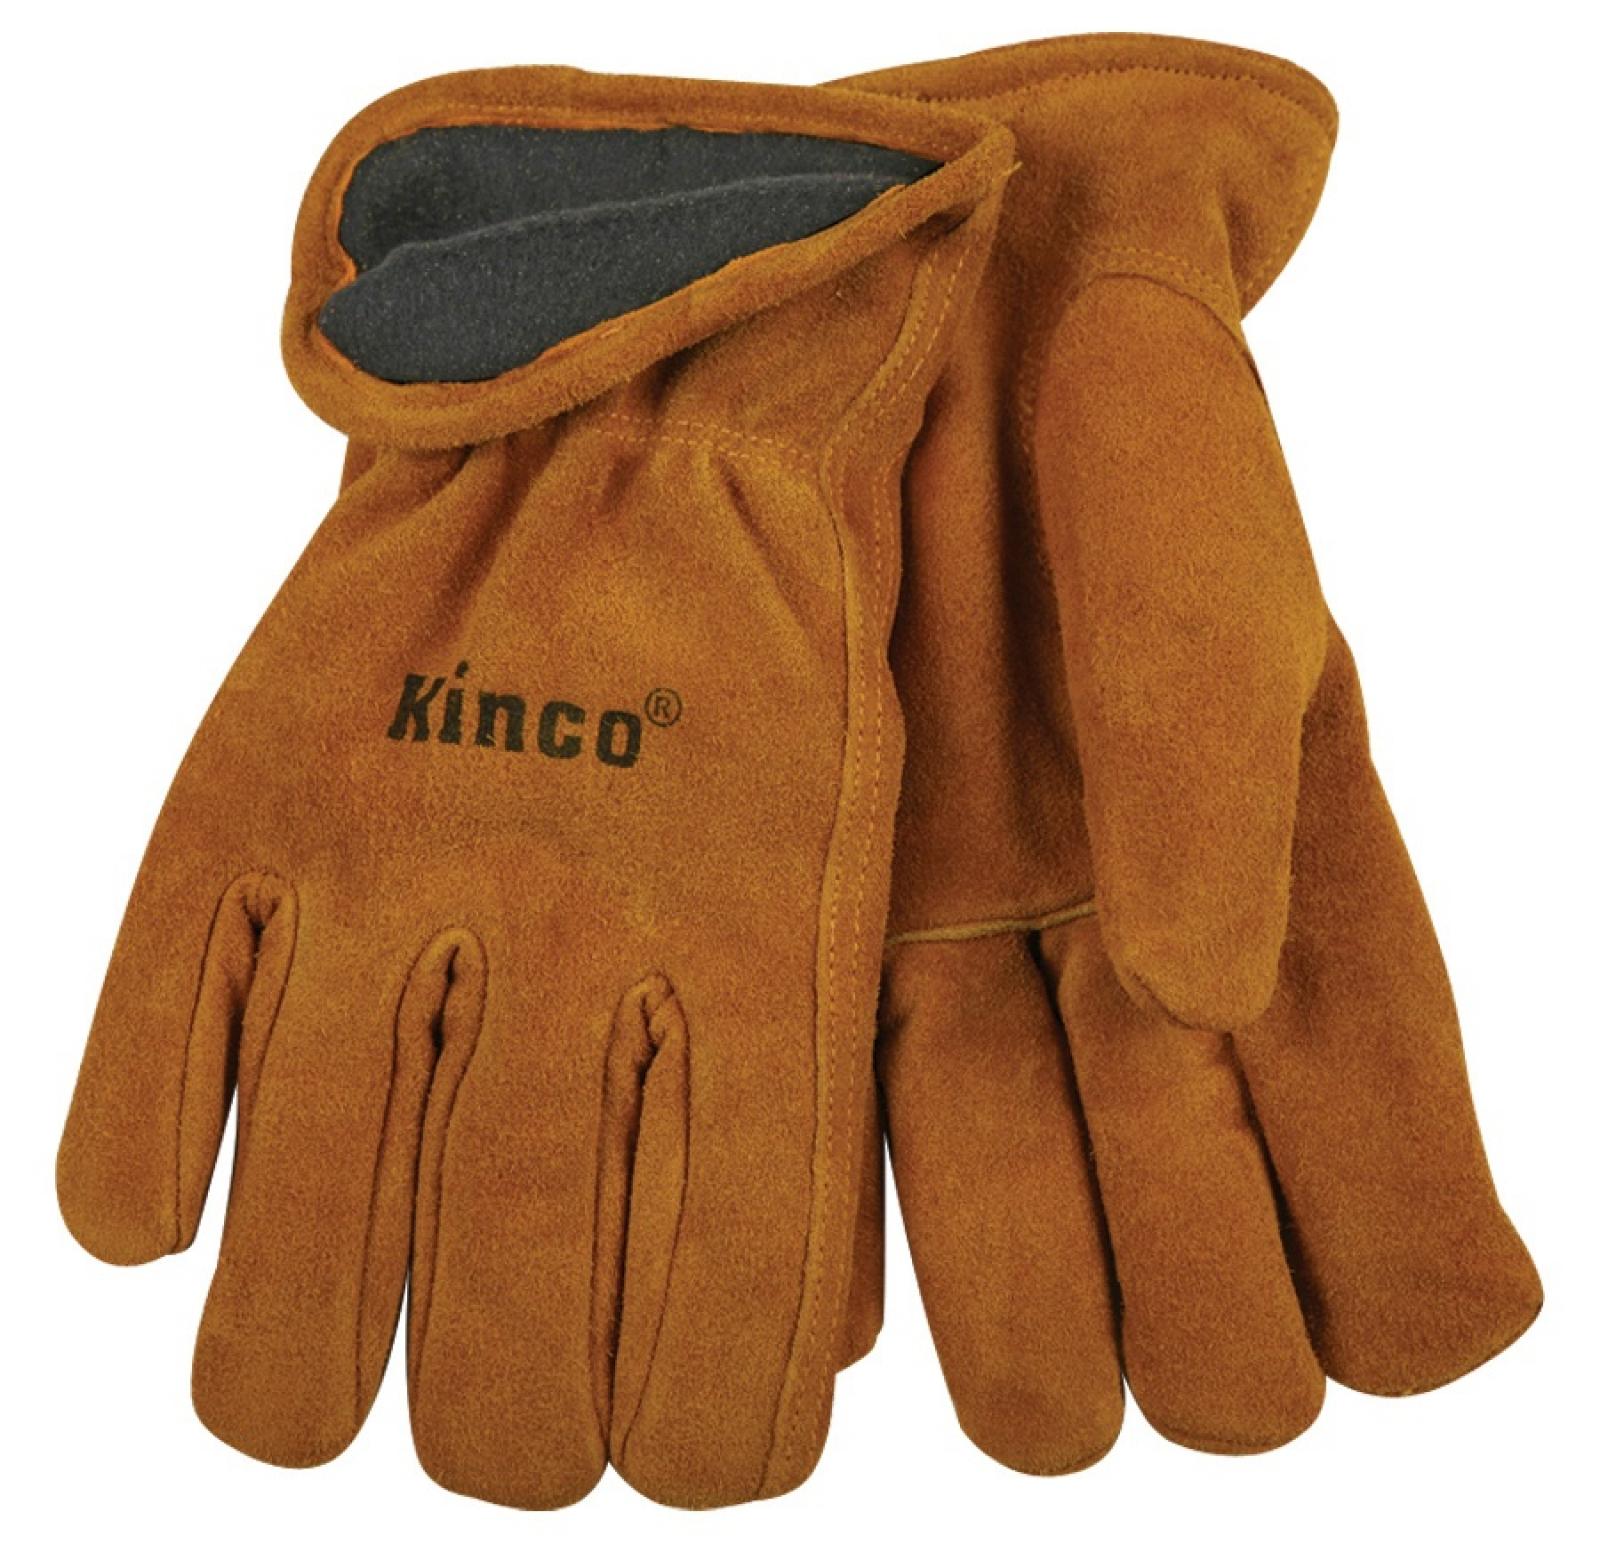 Kinco Men's Lined Premium Suede Cowhide Driver Gloves